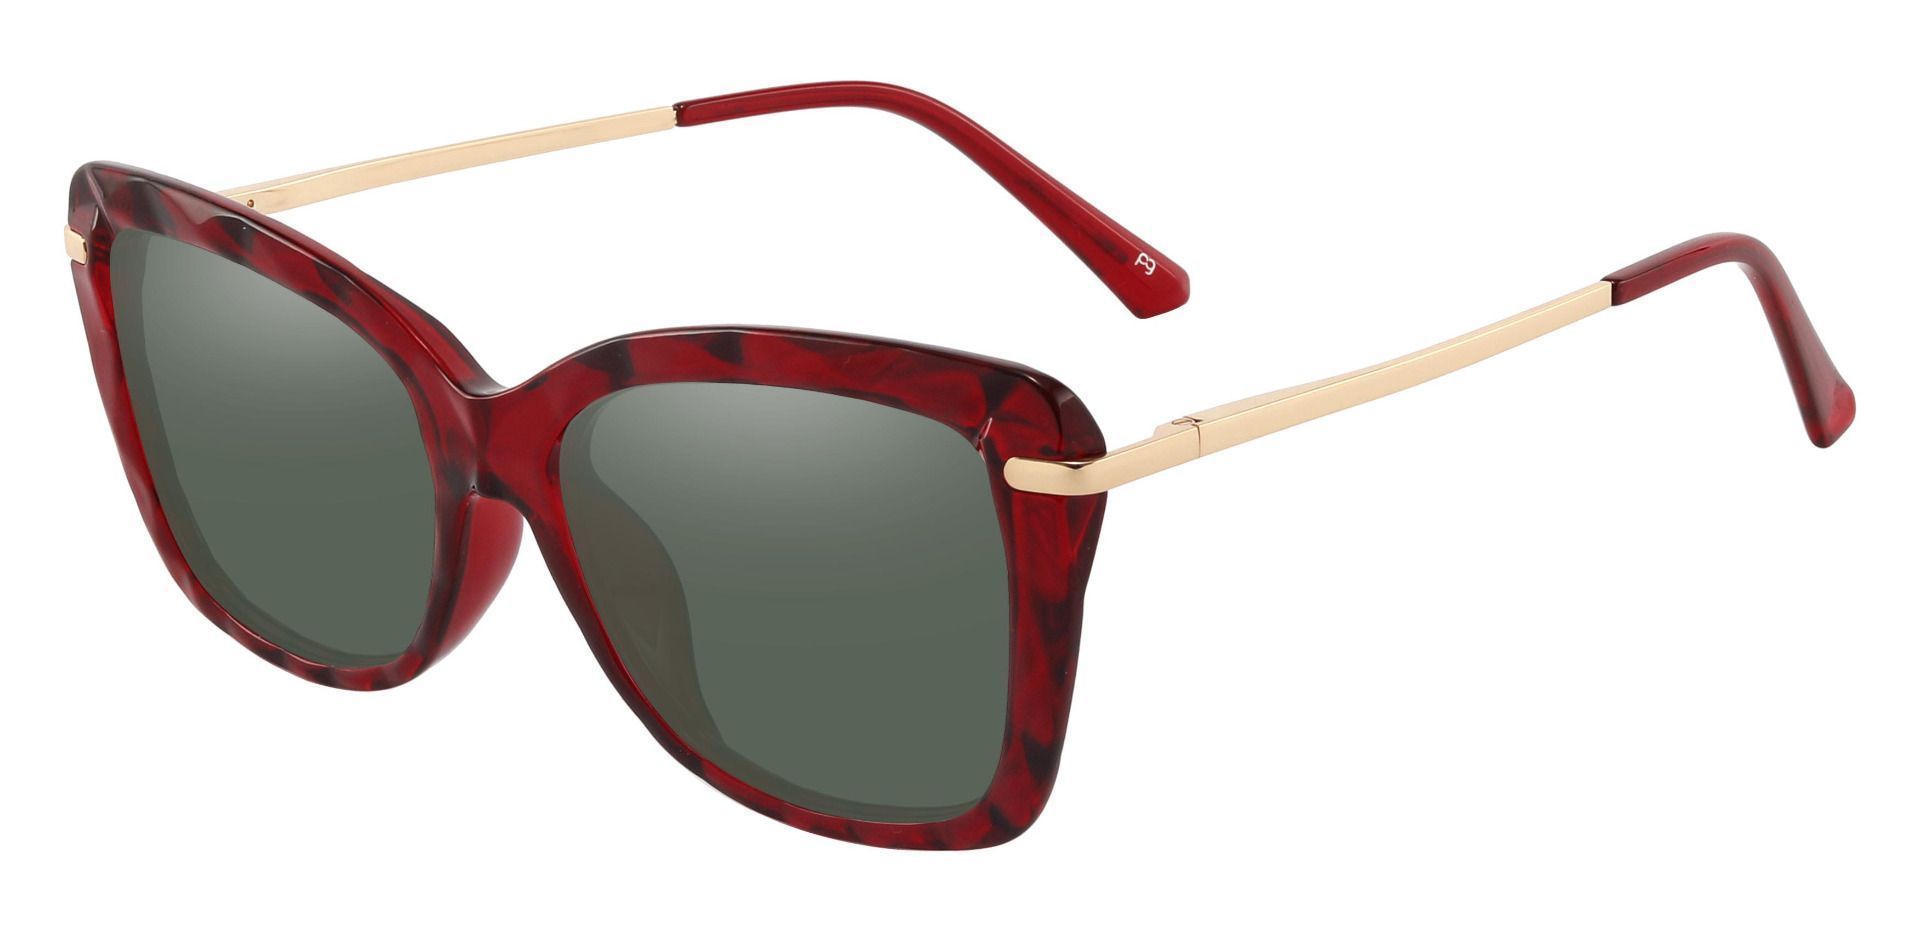 Shoshanna Rectangle Non-Rx Sunglasses - Red Frame With Green Lenses